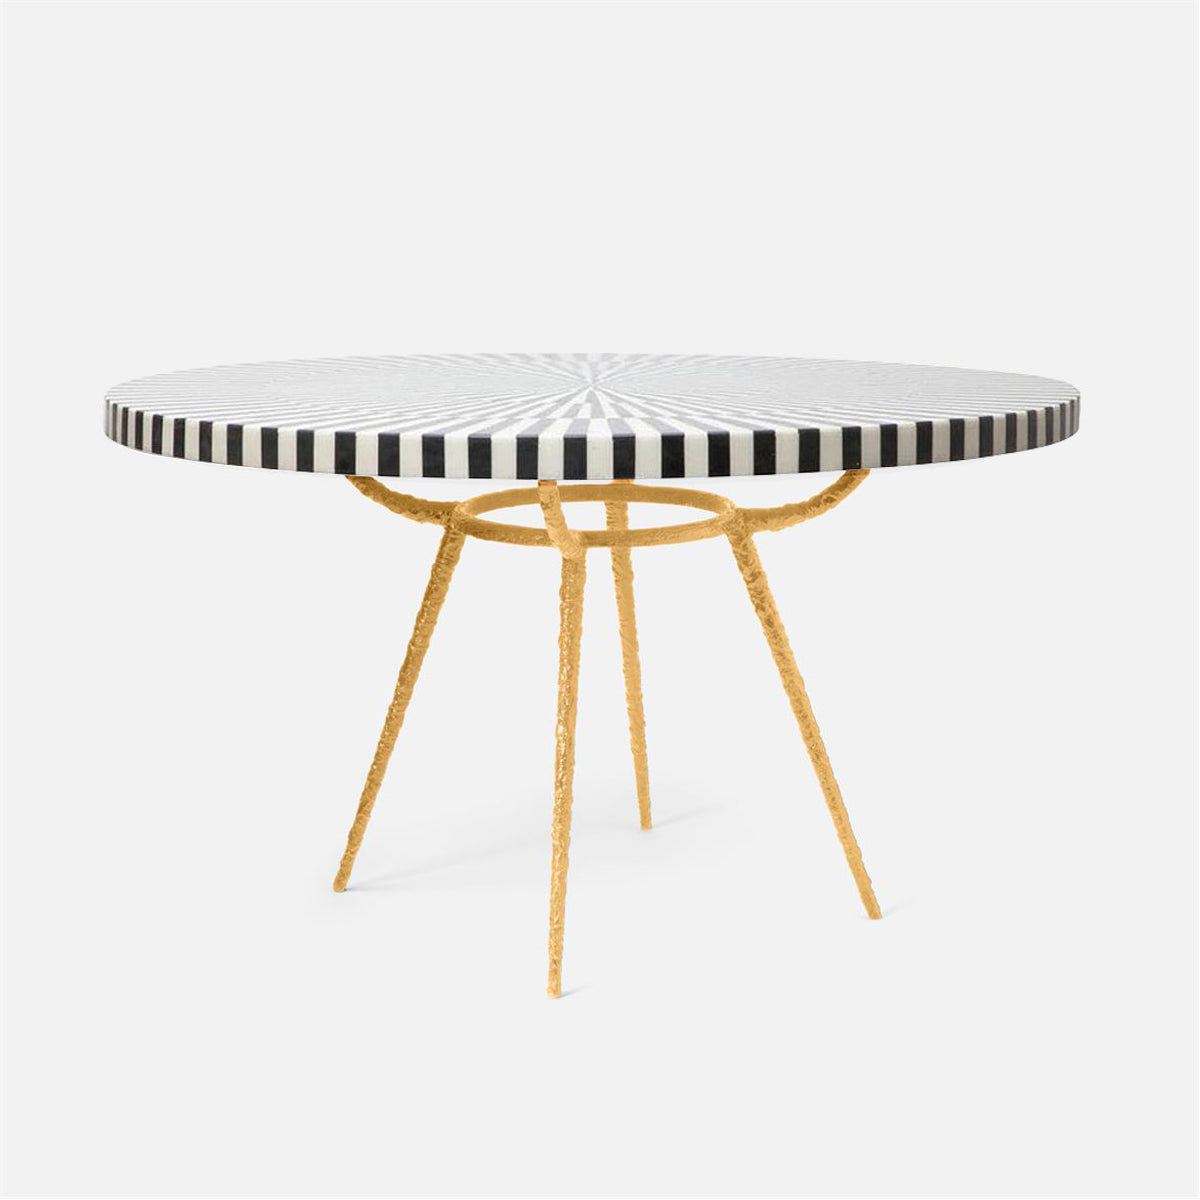 Made Goods Grace Pitted Iron Dining Table in Black/White Stripe Marble